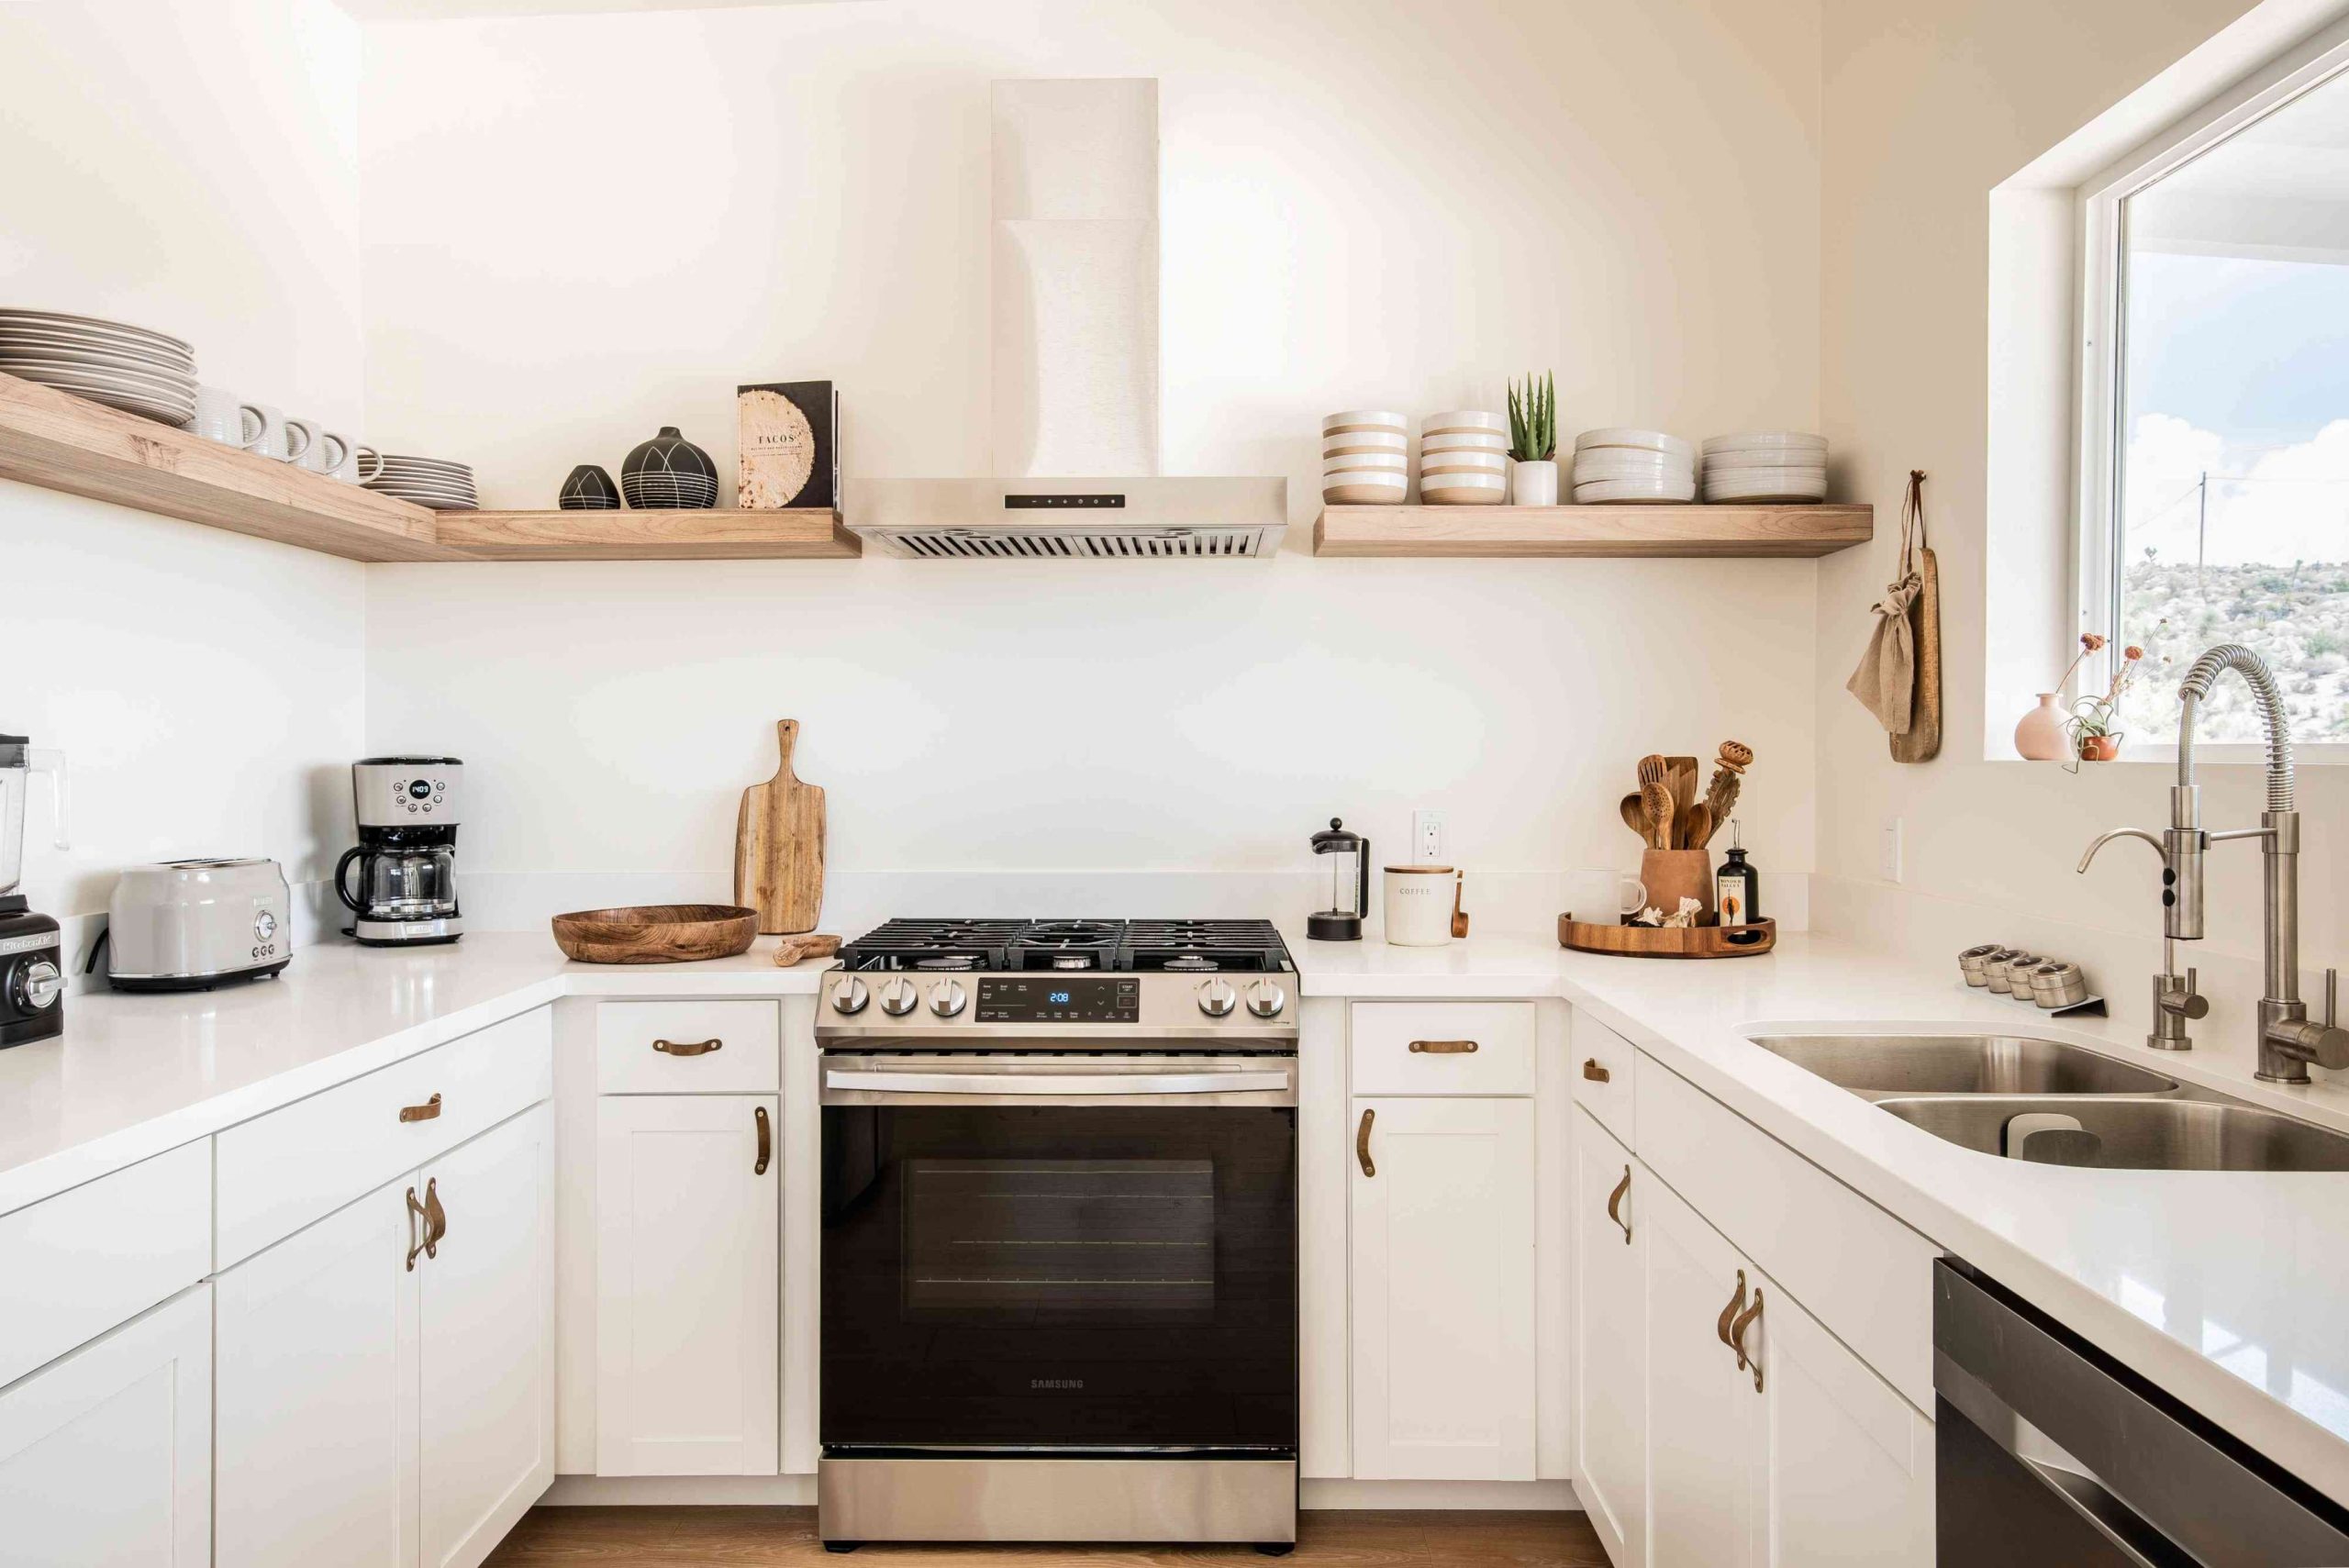 Space-Making Hacks for Small Kitchens